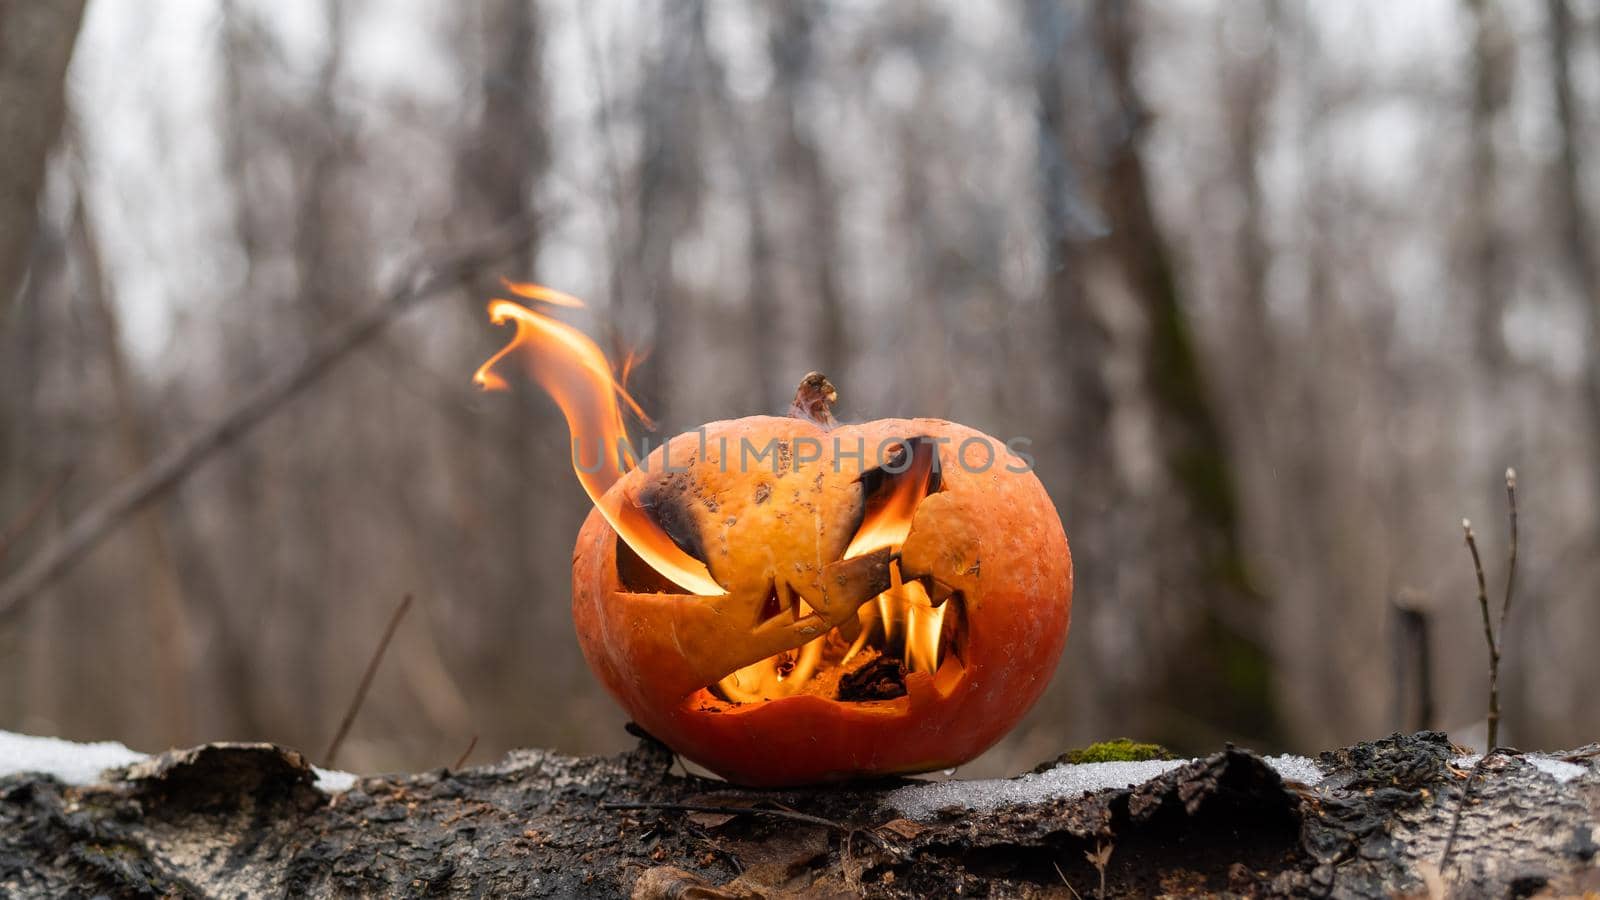 Scary pumpkin with tongues of flame in a dense forest. Jack o lantern for halloween.